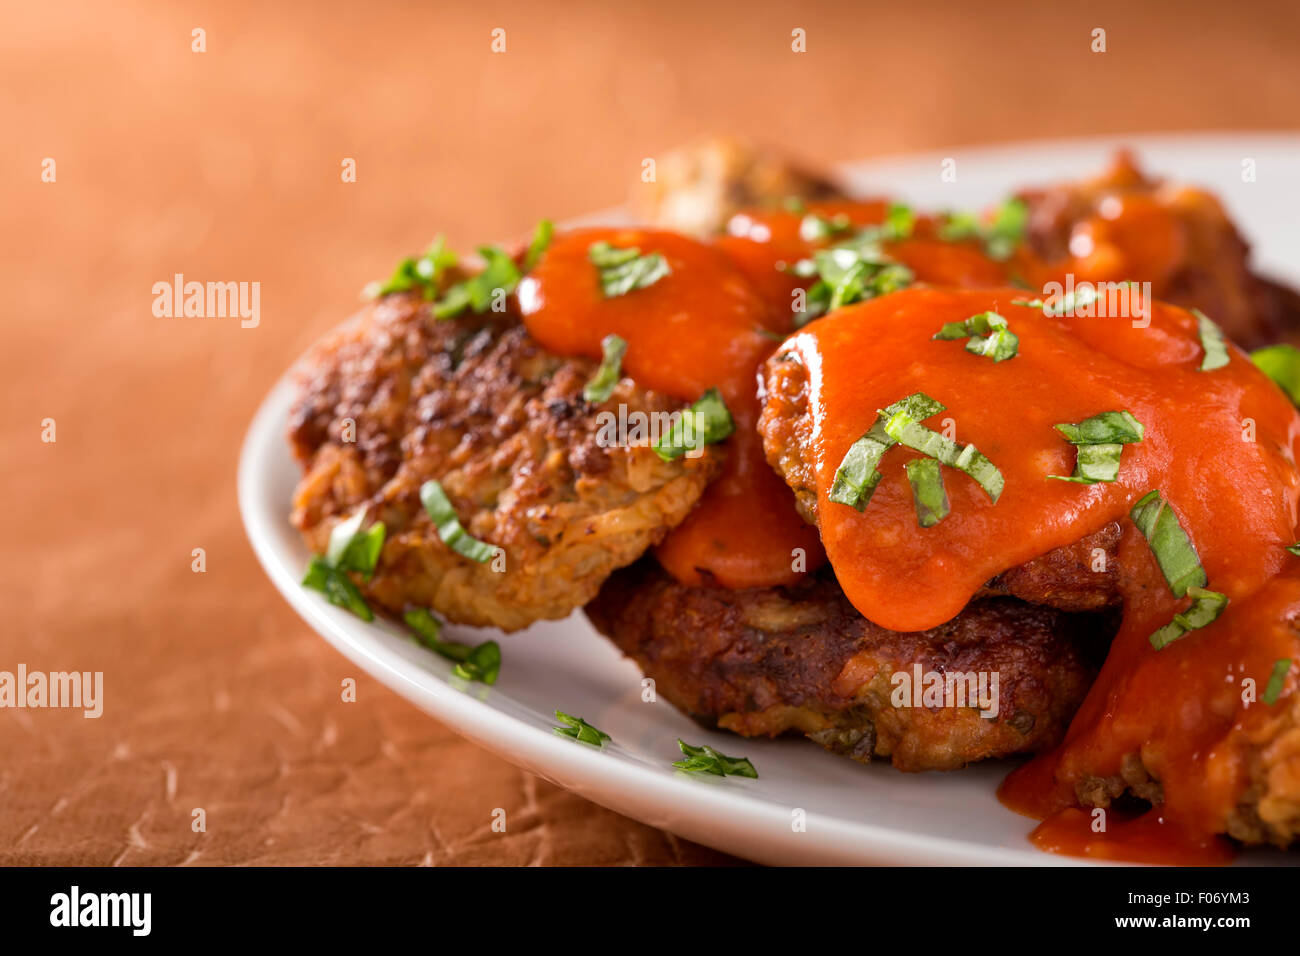 Roasted meatballs with tomato sauce in white plate Stock Photo